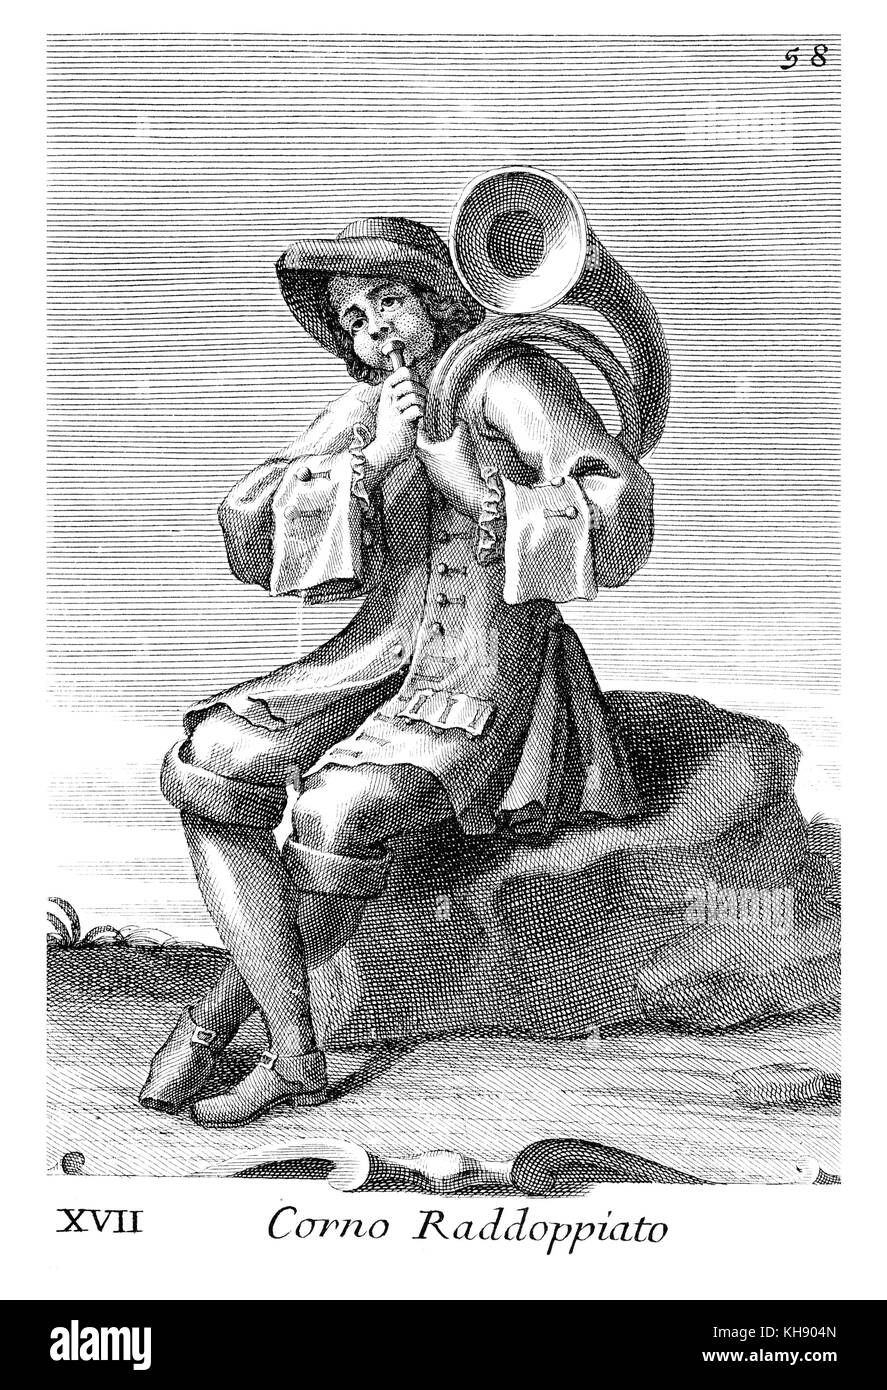 Man playing French horn. Illustration from Filippo Bonanni's  'Gabinetto Armonico'  published in 1723, Illustration 17.  Engraving by Arnold van Westerhout. Caption reads Corno Raddoppiato. Stock Photo